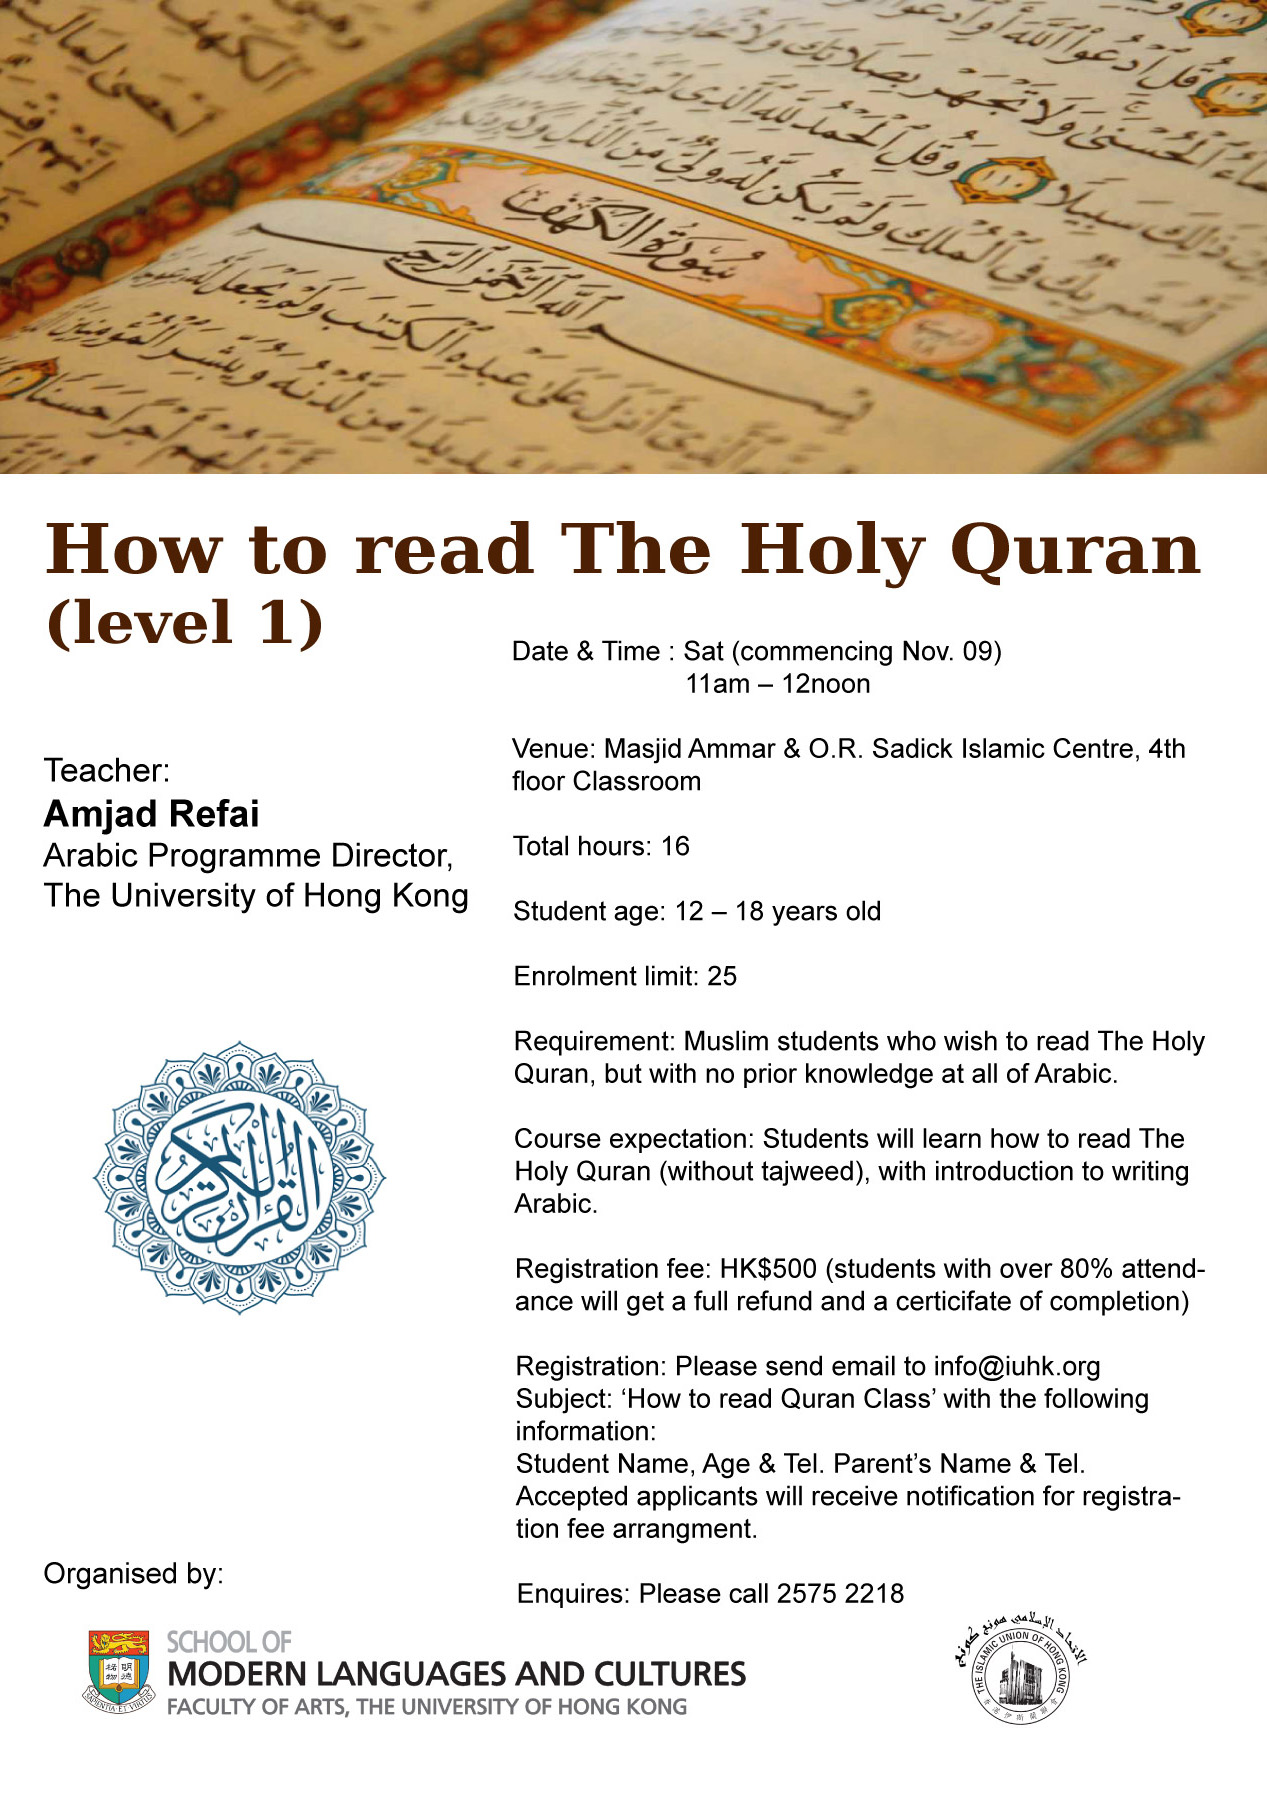 How to read Quran level1 Poster